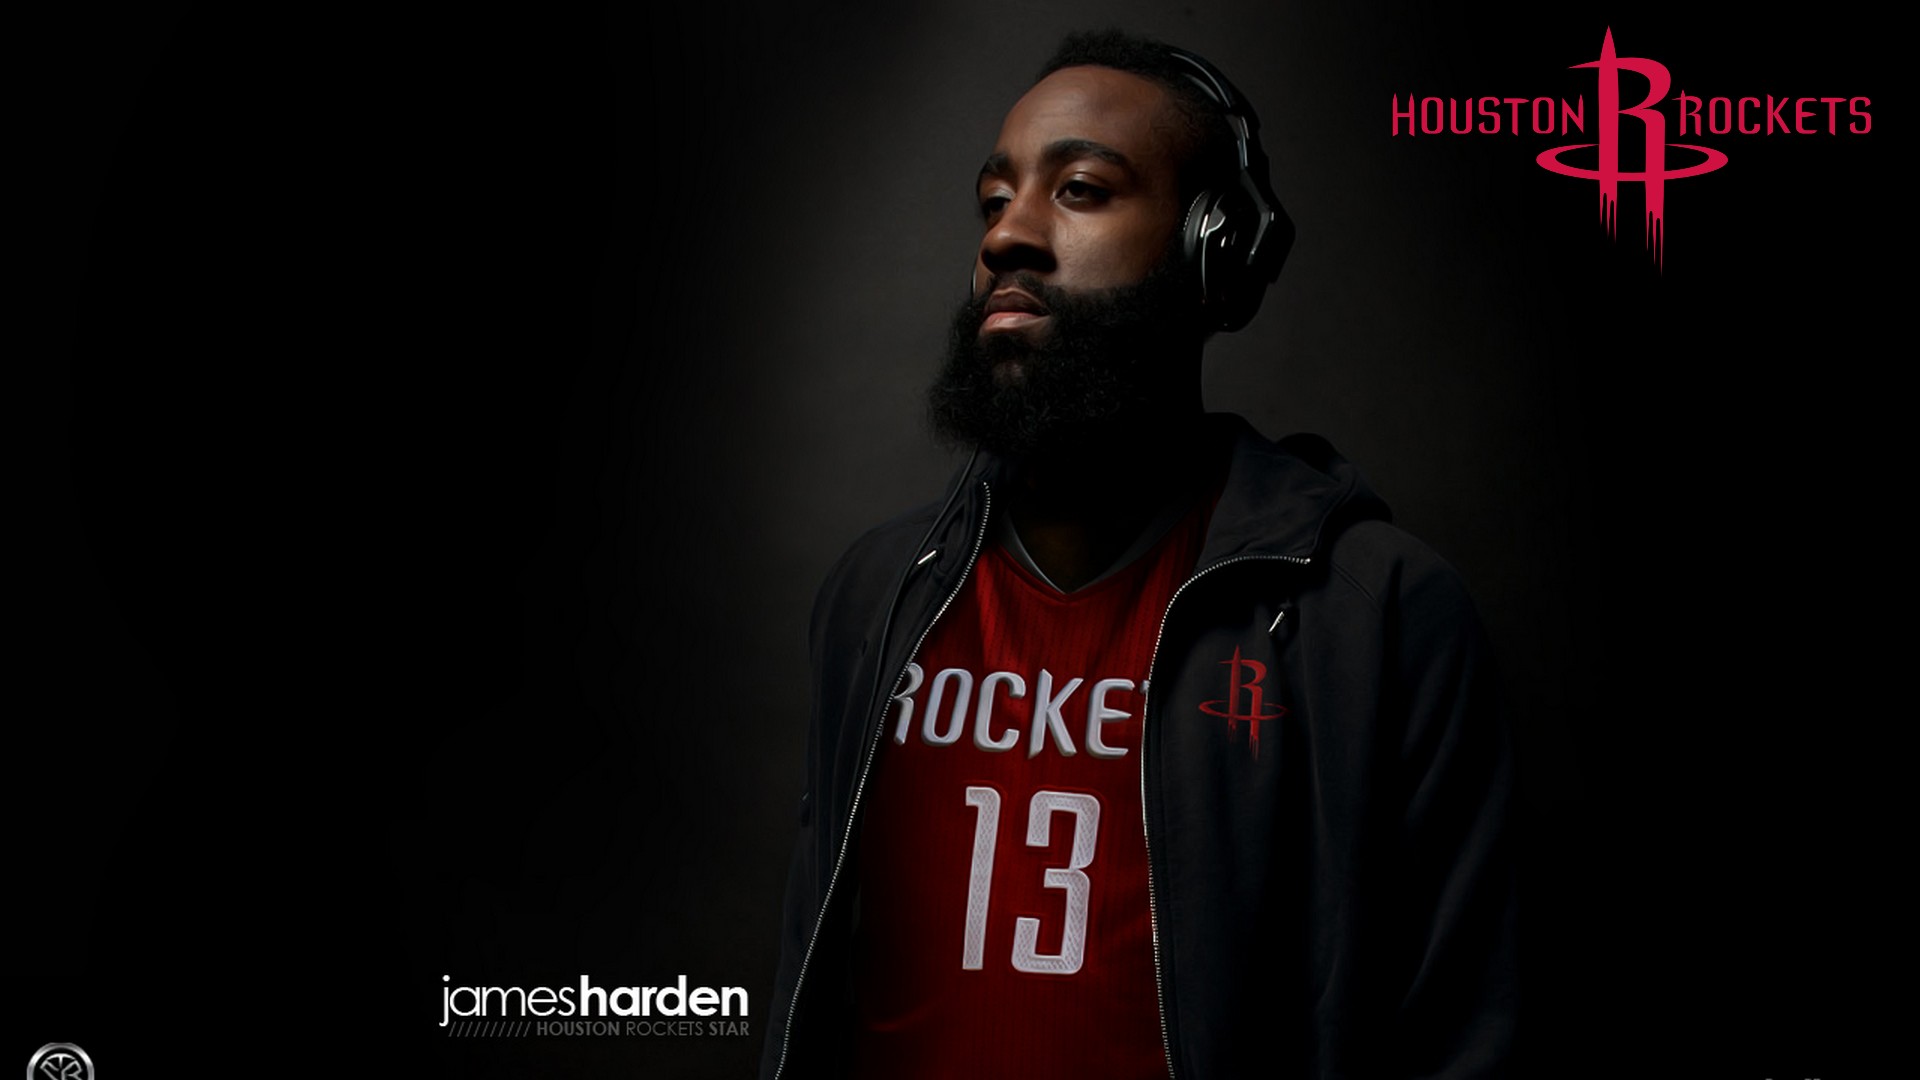 Wallpaper Desktop James Harden Beard HD with image dimensions 1920x1080 pixel. You can make this wallpaper for your Desktop Computer Backgrounds, Windows or Mac Screensavers, iPhone Lock screen, Tablet or Android and another Mobile Phone device